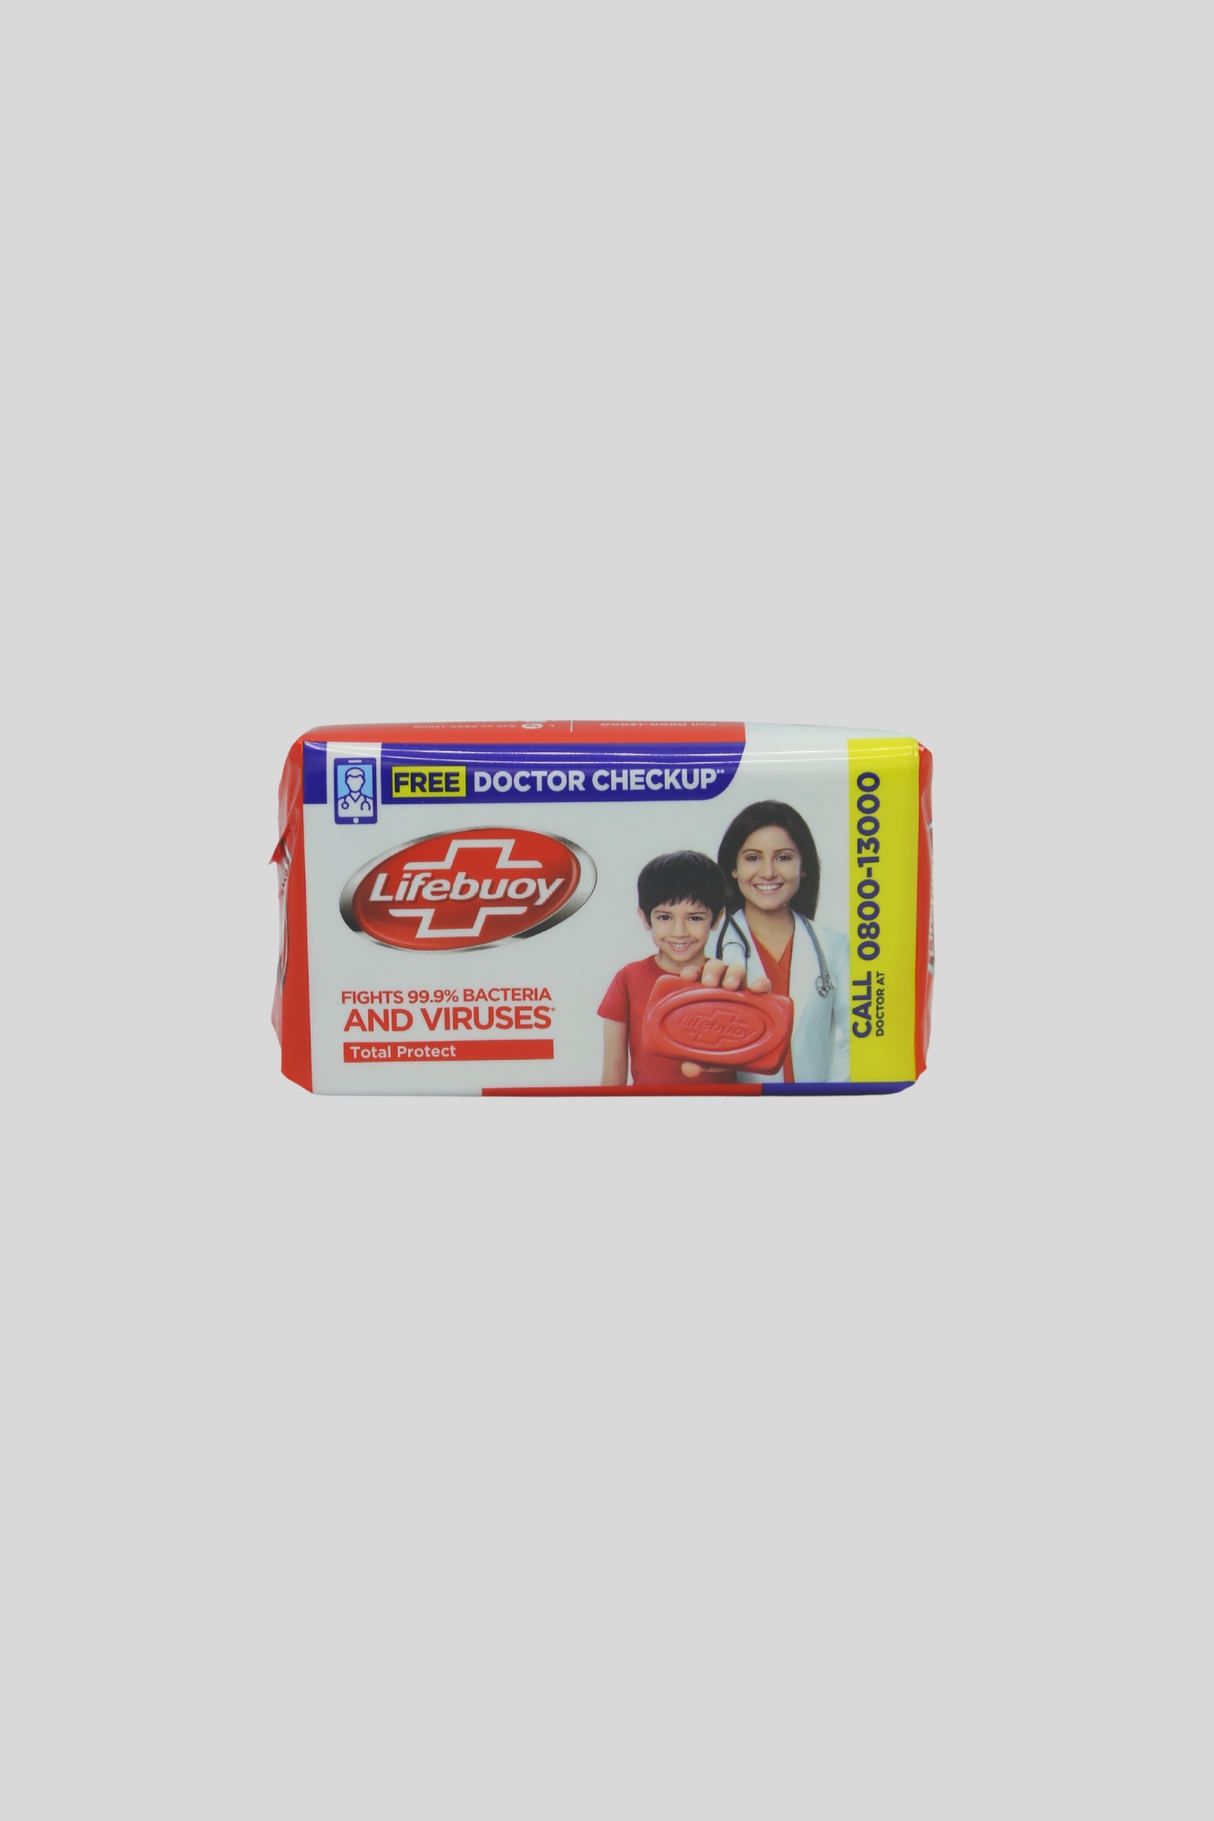 lifebuoy soap total protect 128g